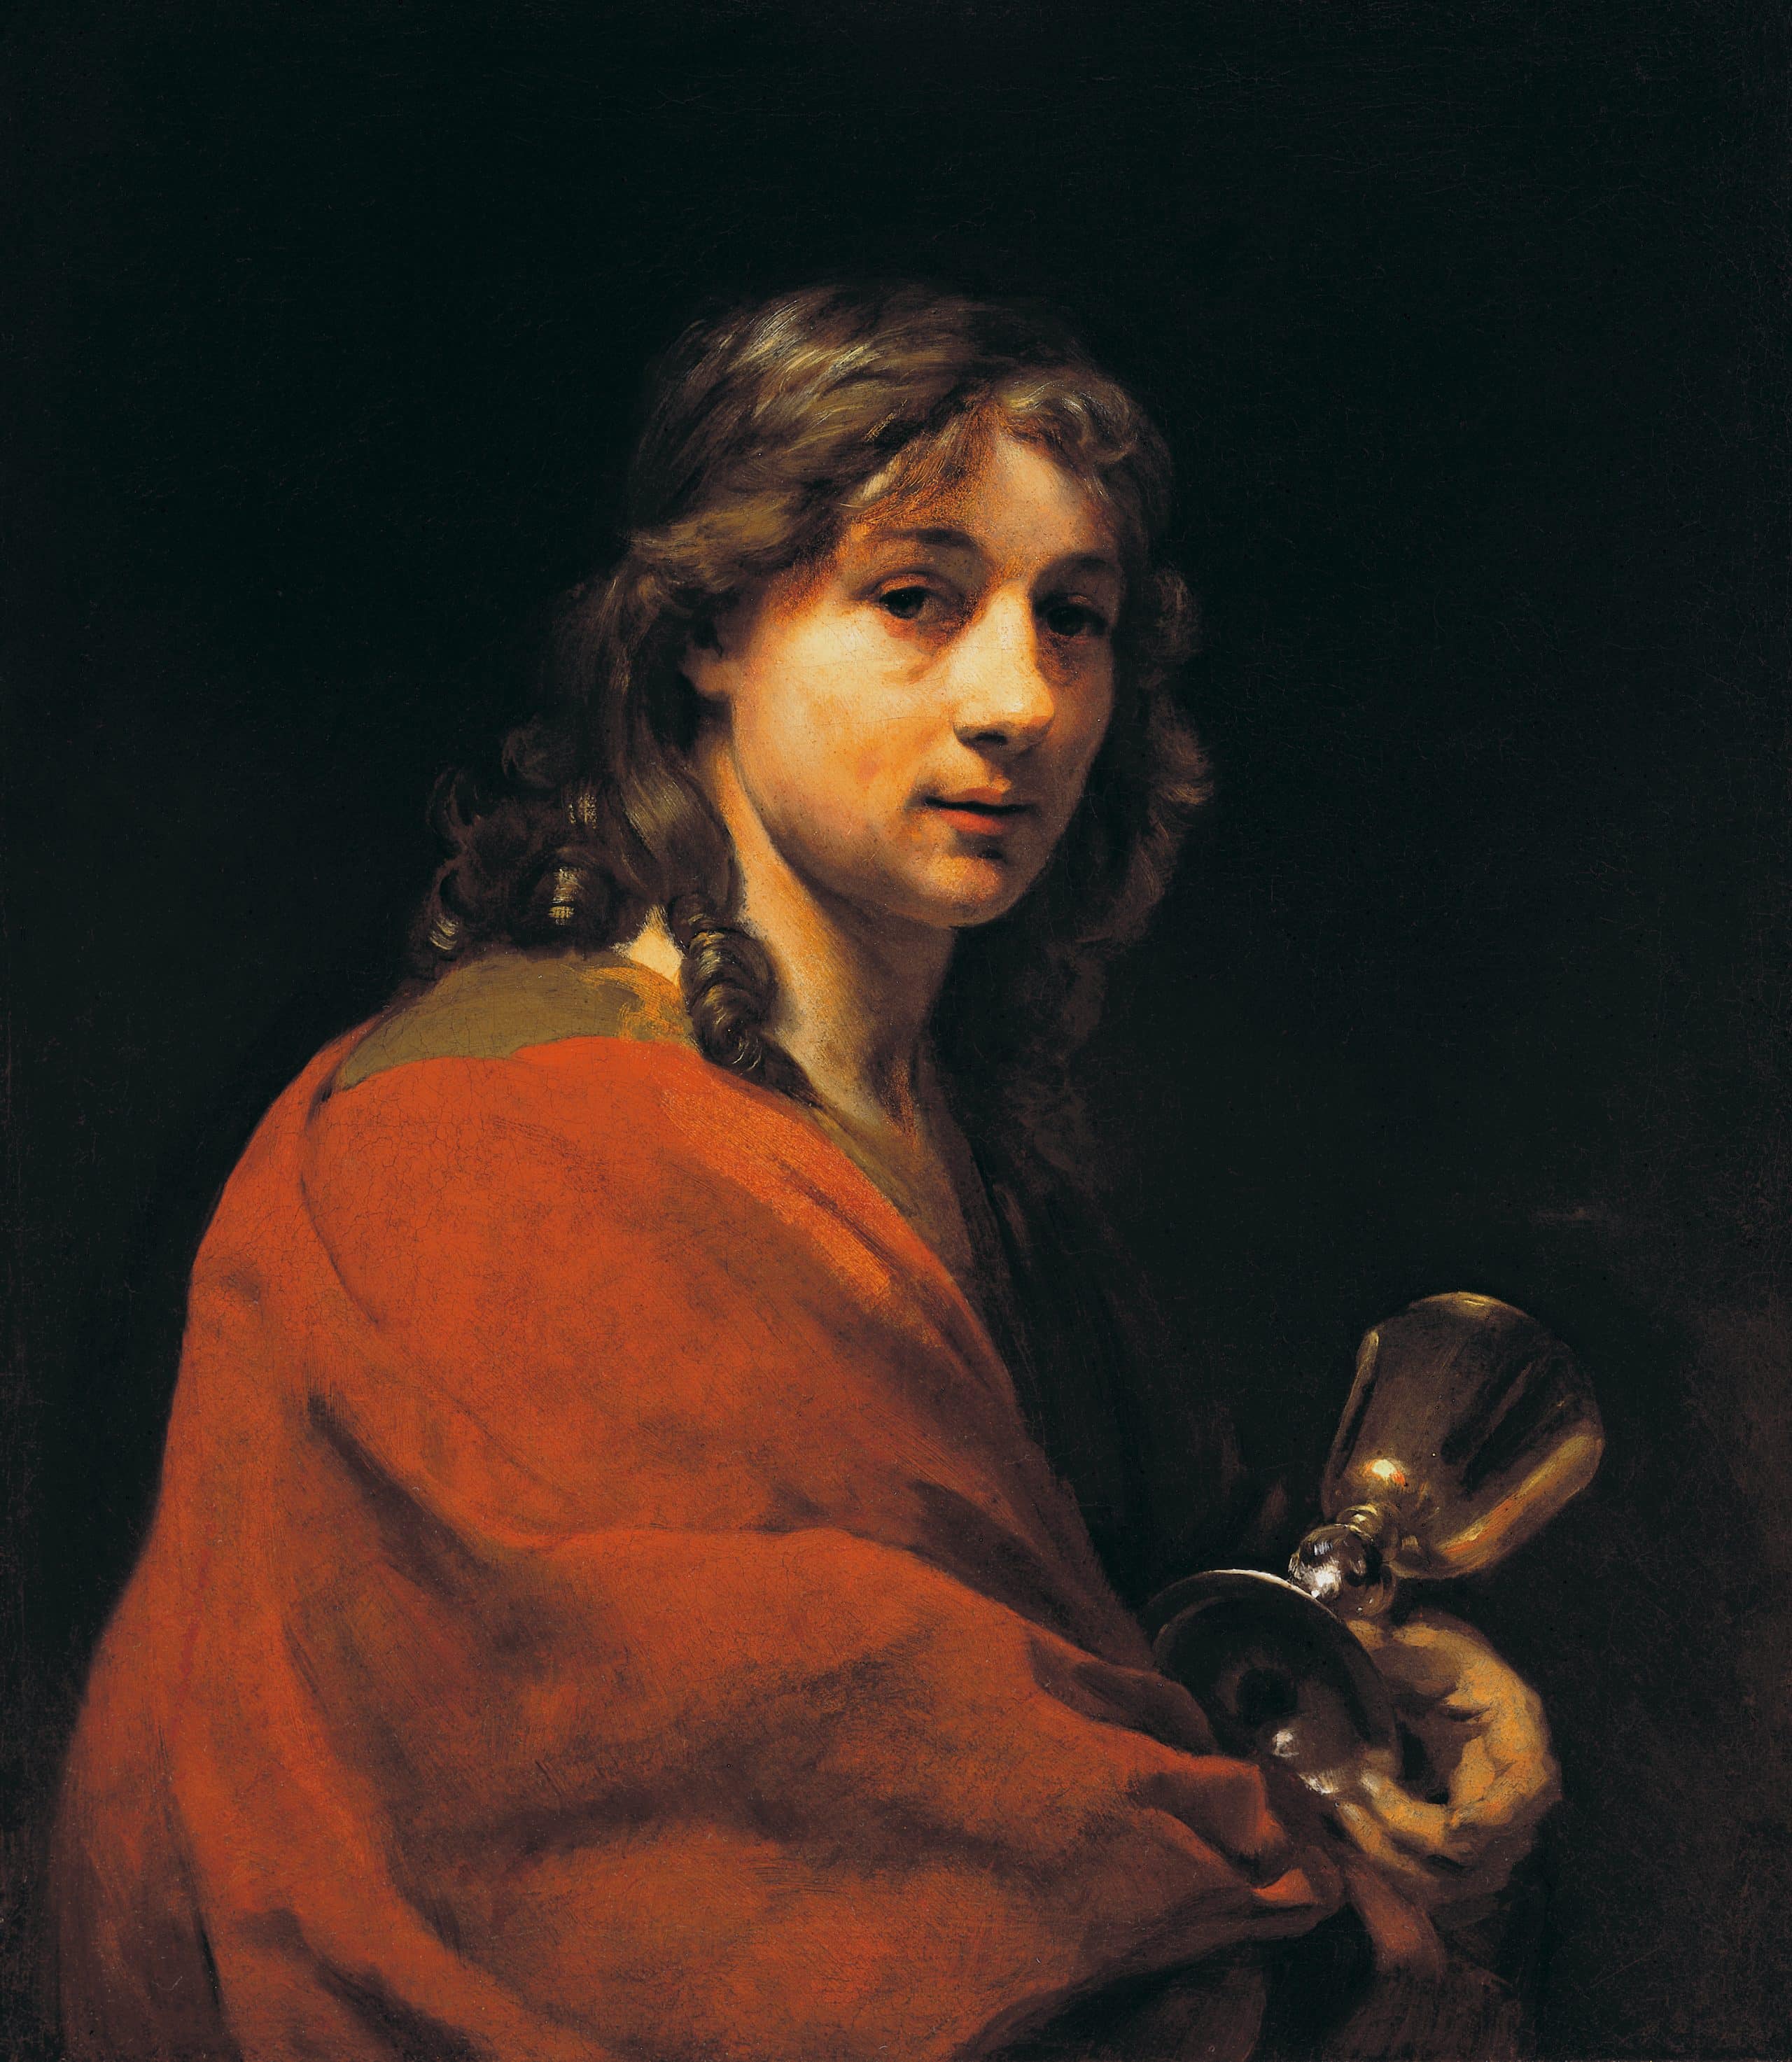 Willem Drost, Self-Portrait as St. John the Evangelist, around 1655, oil on canvas. Gift of Alfred and Isabel Bader, 2013 (56-003.13)